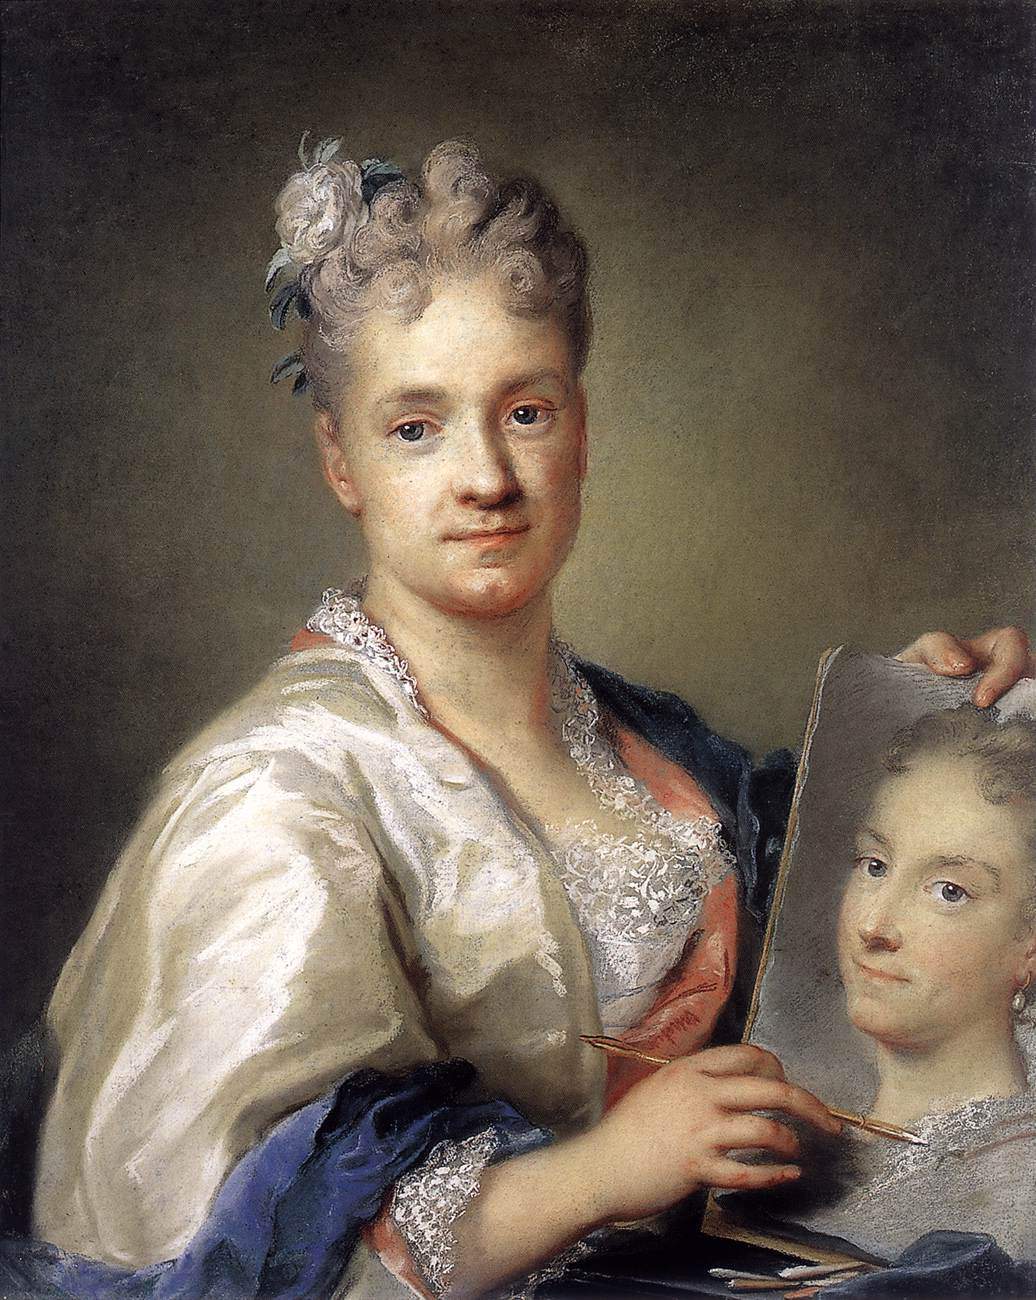 Rosalba Carriera, life and major works of the lady of the pastel 